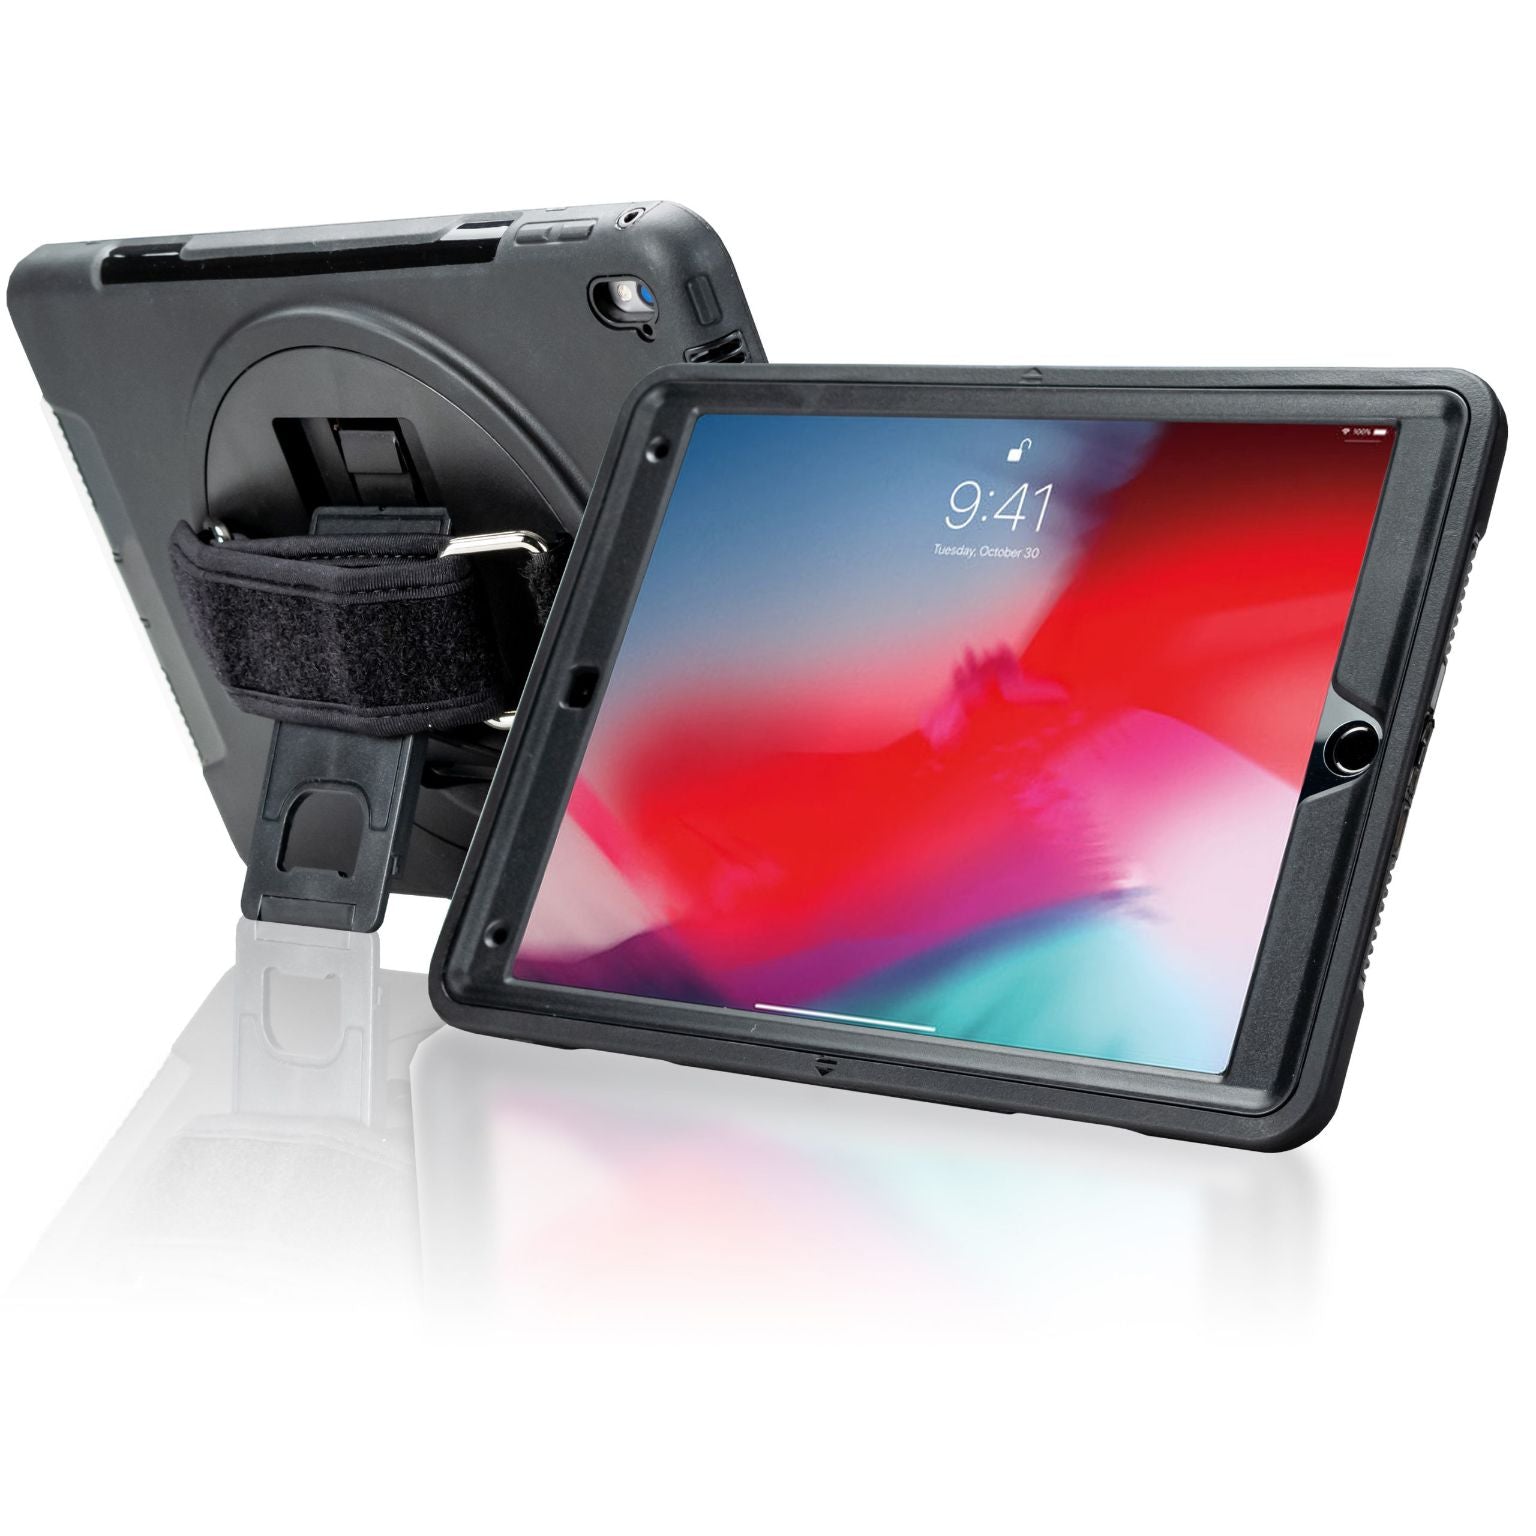 Military Grade Protective Case with Built-in 360 Degree Rotatable Grip Kickstand for iPad Pro 9.7"